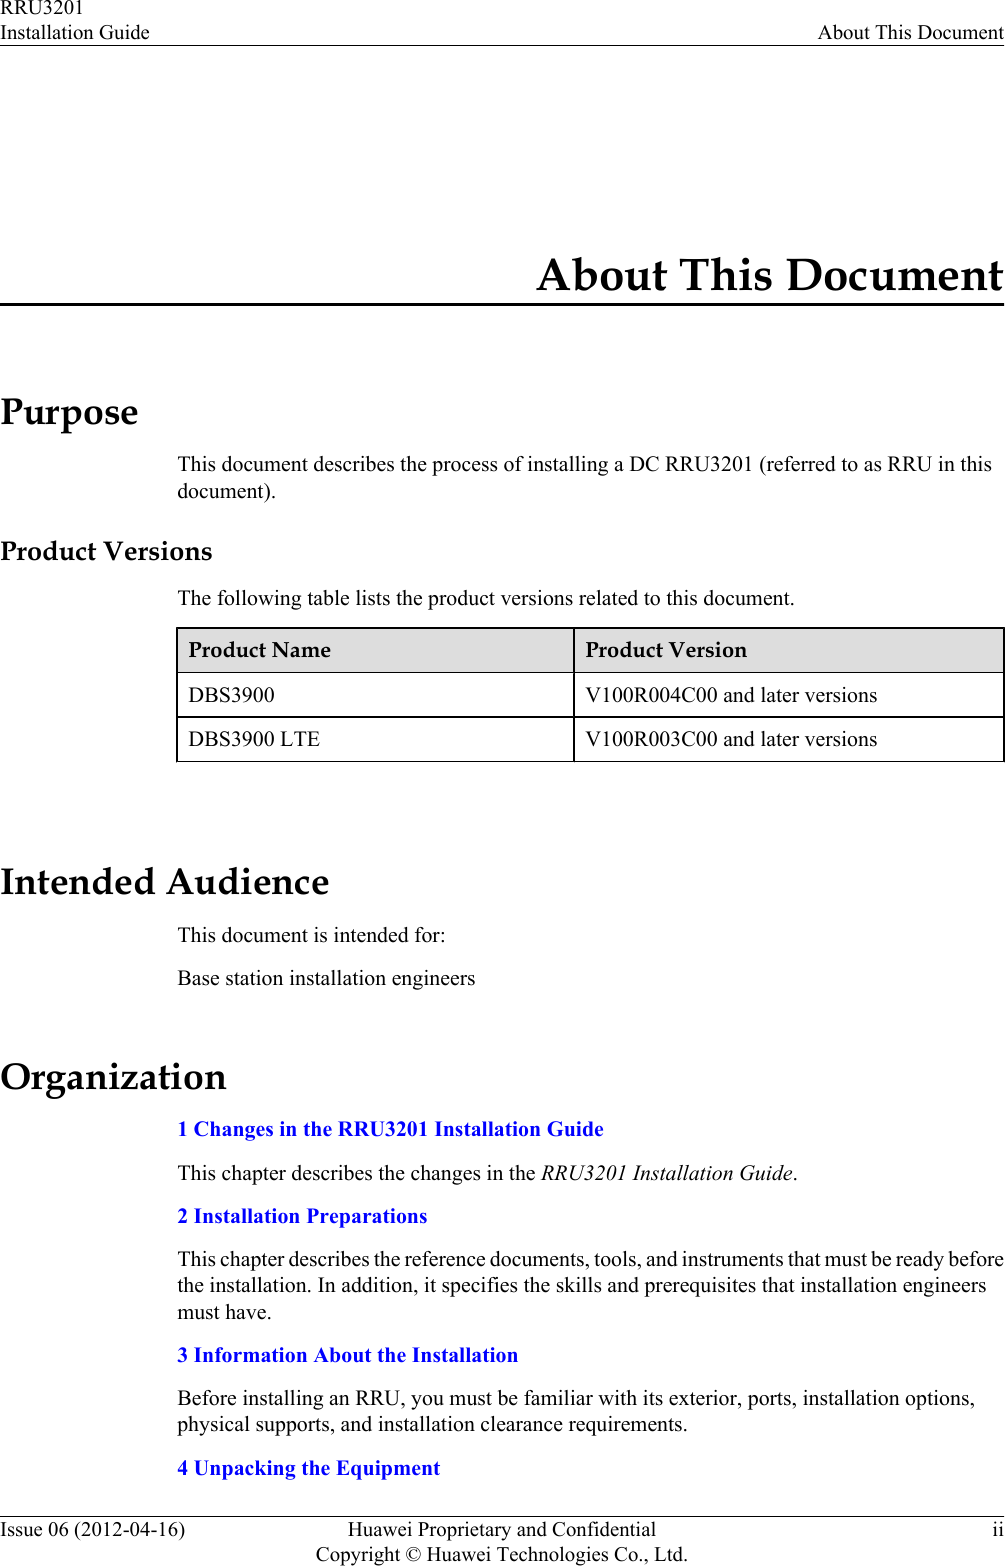 About This DocumentPurposeThis document describes the process of installing a DC RRU3201 (referred to as RRU in thisdocument).Product VersionsThe following table lists the product versions related to this document.Product Name Product VersionDBS3900 V100R004C00 and later versionsDBS3900 LTE V100R003C00 and later versions Intended AudienceThis document is intended for:Base station installation engineersOrganization1 Changes in the RRU3201 Installation GuideThis chapter describes the changes in the RRU3201 Installation Guide.2 Installation PreparationsThis chapter describes the reference documents, tools, and instruments that must be ready beforethe installation. In addition, it specifies the skills and prerequisites that installation engineersmust have.3 Information About the InstallationBefore installing an RRU, you must be familiar with its exterior, ports, installation options,physical supports, and installation clearance requirements.4 Unpacking the EquipmentRRU3201Installation Guide About This DocumentIssue 06 (2012-04-16) Huawei Proprietary and ConfidentialCopyright © Huawei Technologies Co., Ltd.ii